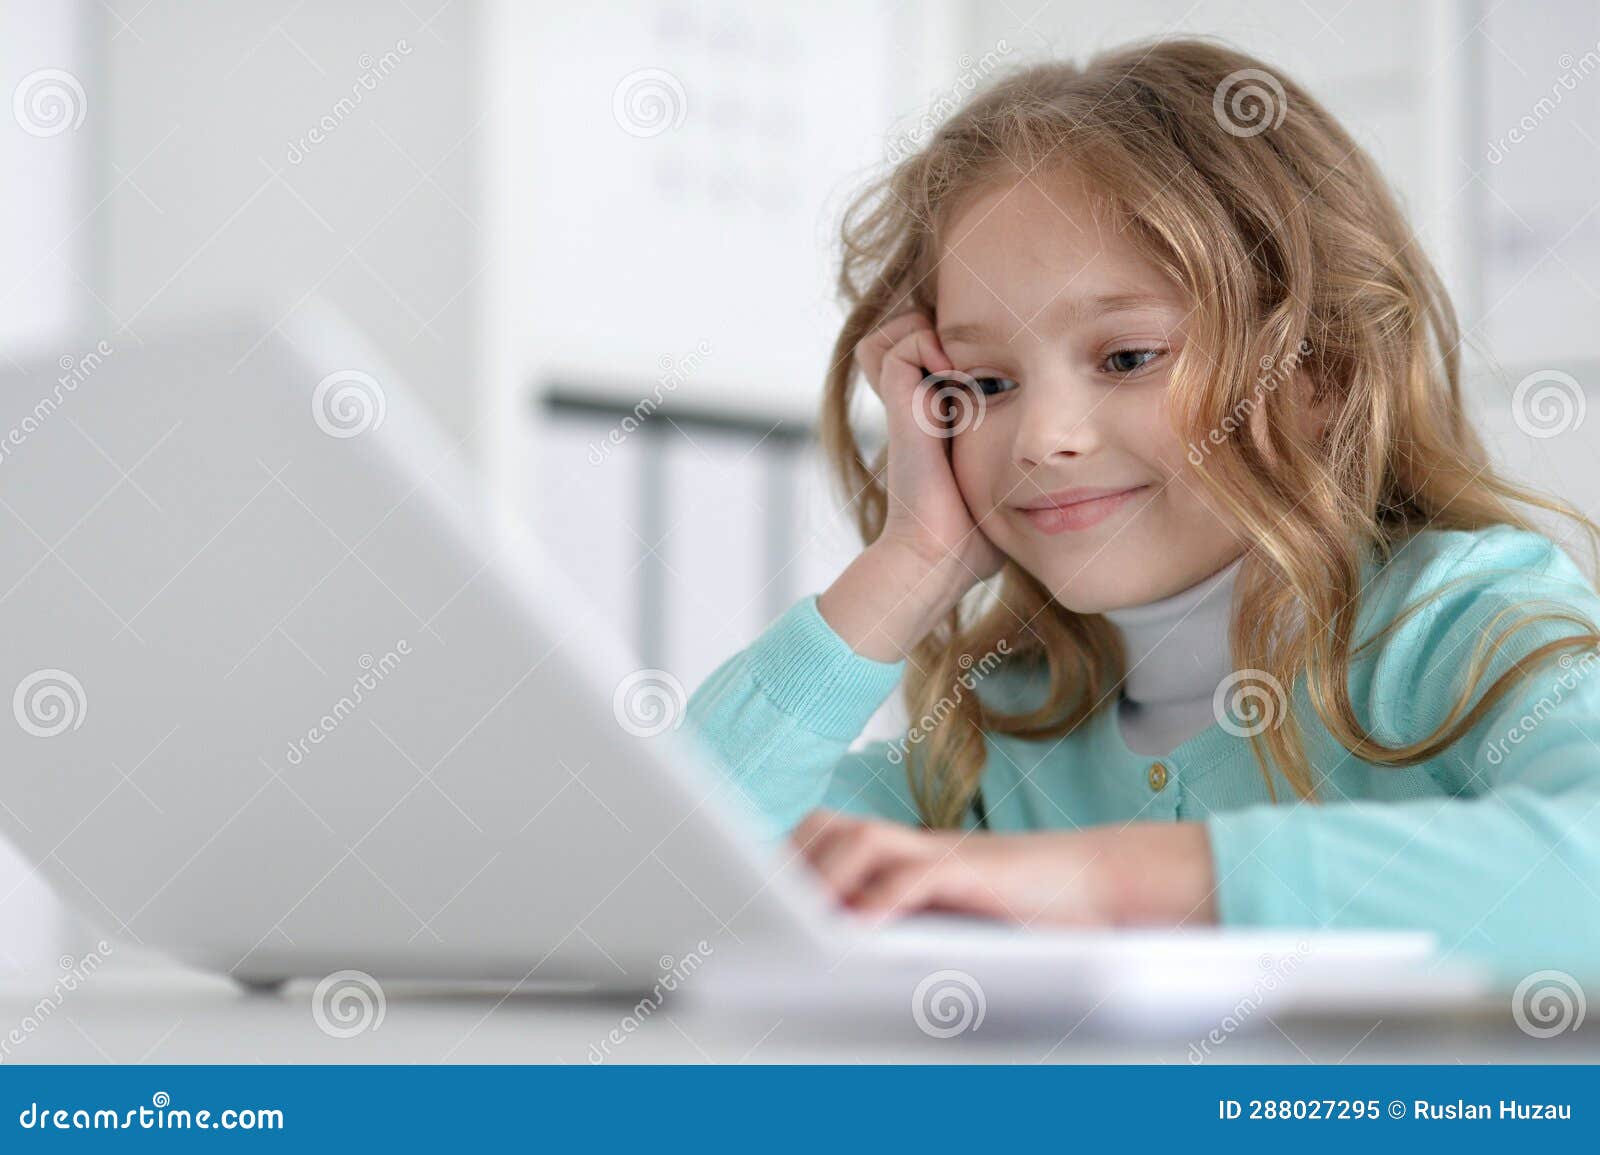 Cute and Happy Little Girl Children Using Laptop Computer Stock Image ...